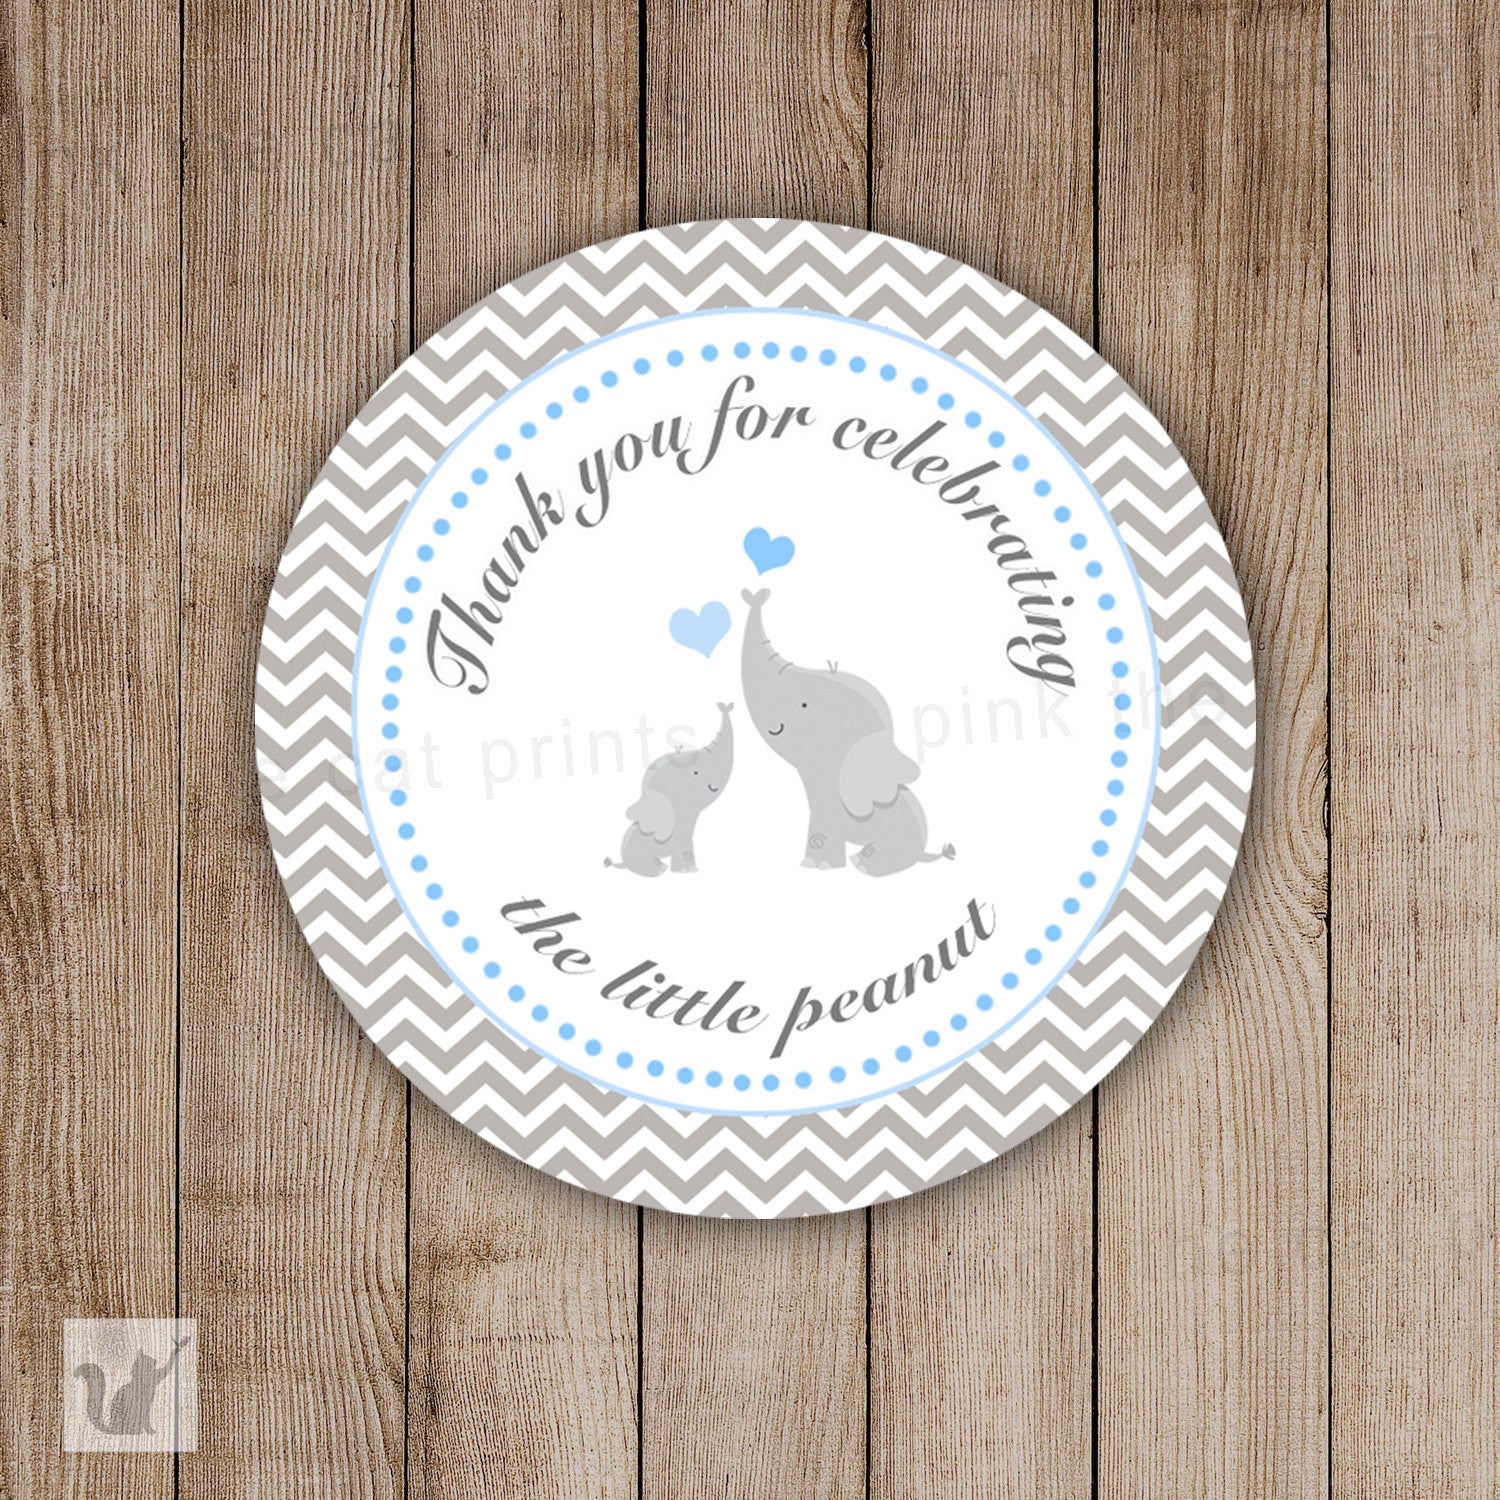 INSTANT DOWNLOAD Grey Chevron Elephant Baby Shower Thank You Tag Labels - Polka Dots Party Favors Baby Shower Favors Baby Shower Tags